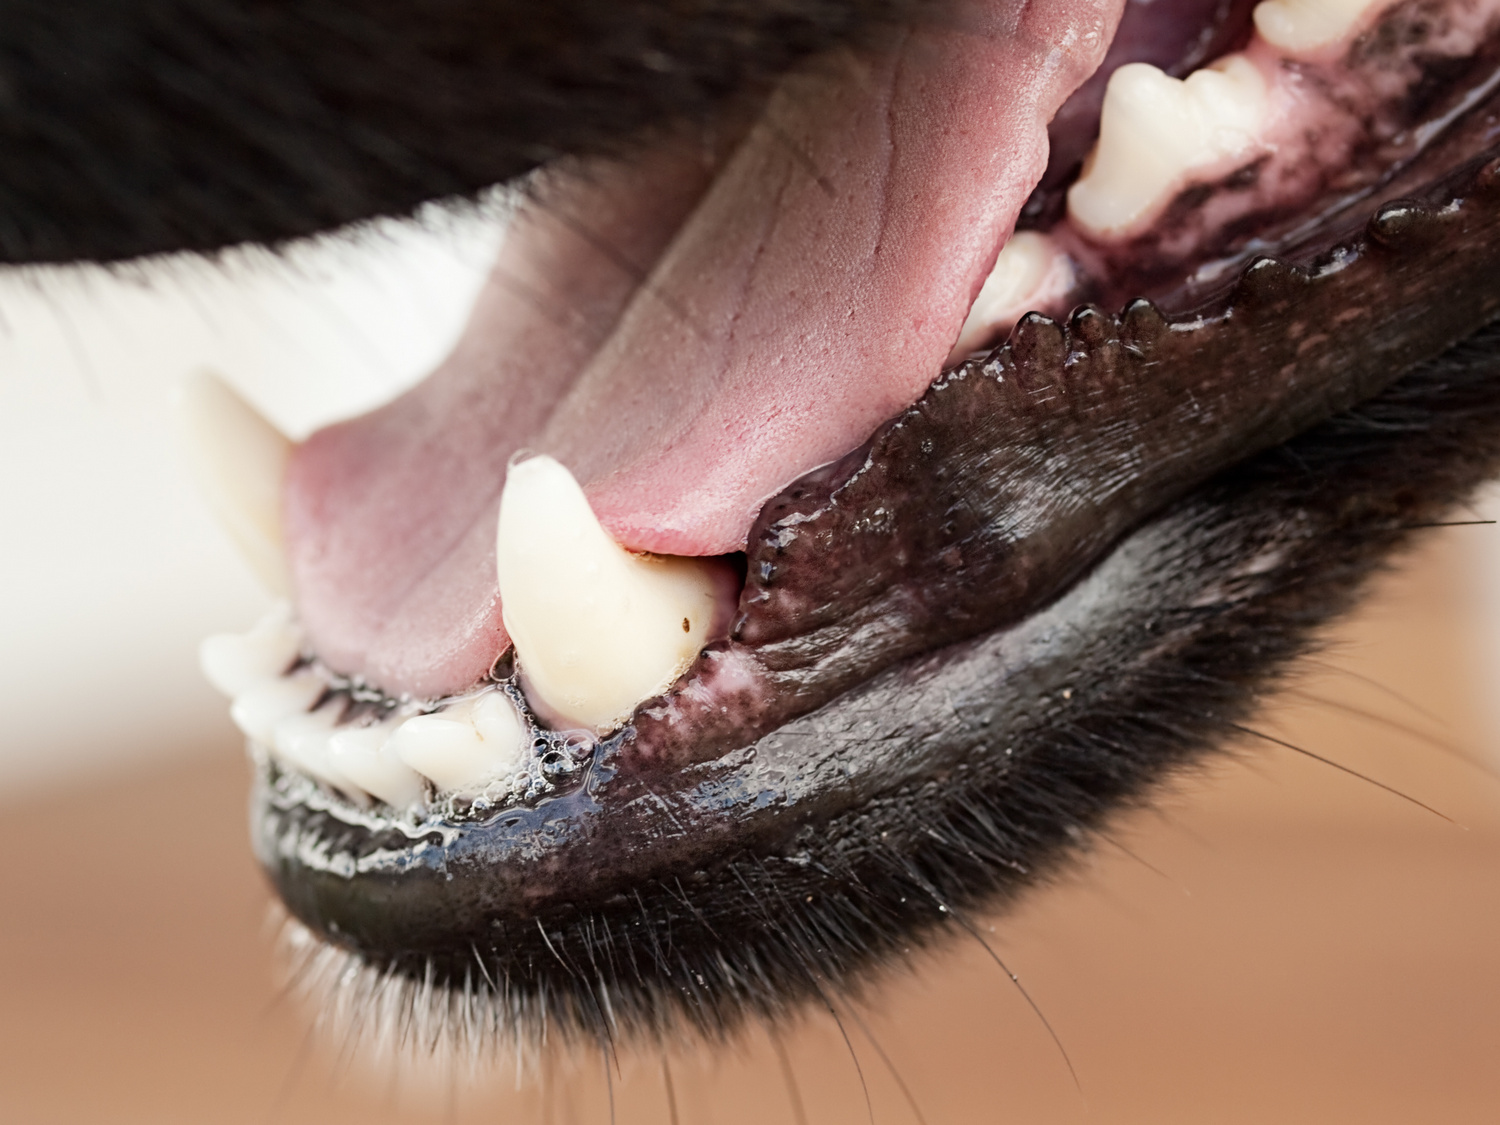 why do vets look at dogs gums